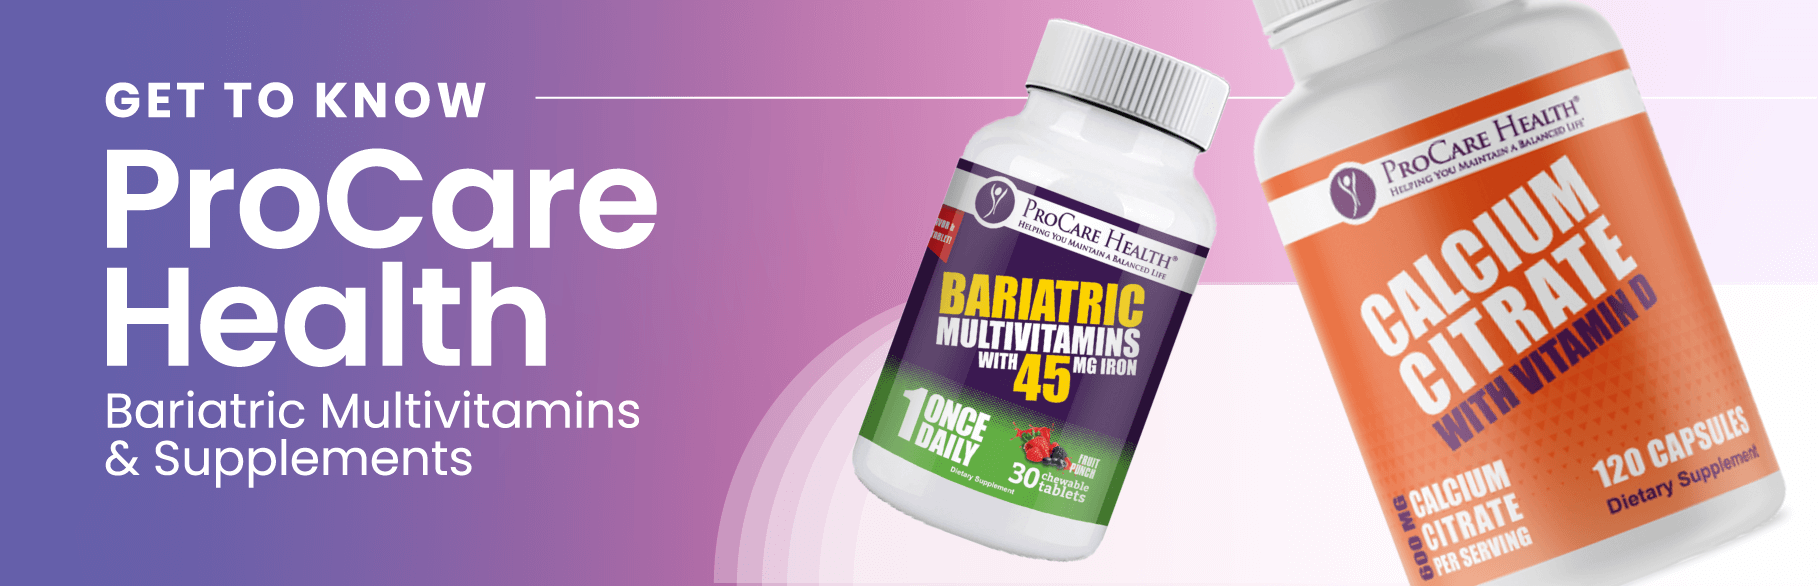 Procare Health bariatric multivitamins and supplements